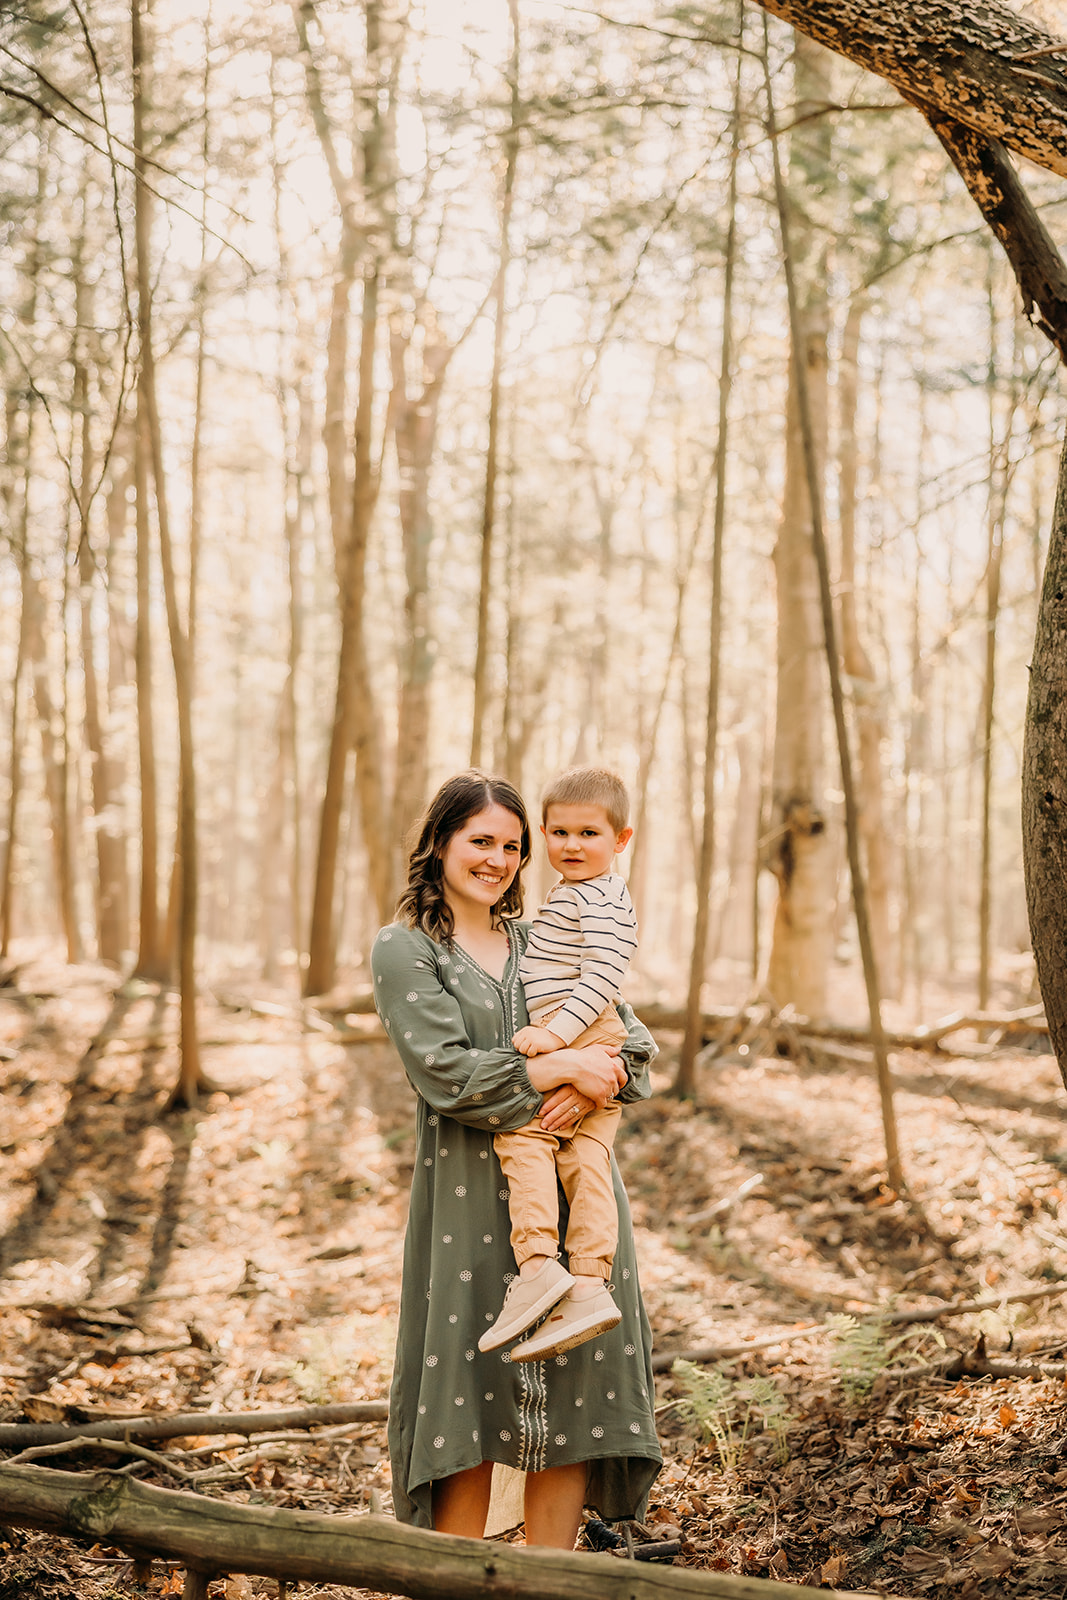 Tender moments captured between mother and child in a forest photoshoot